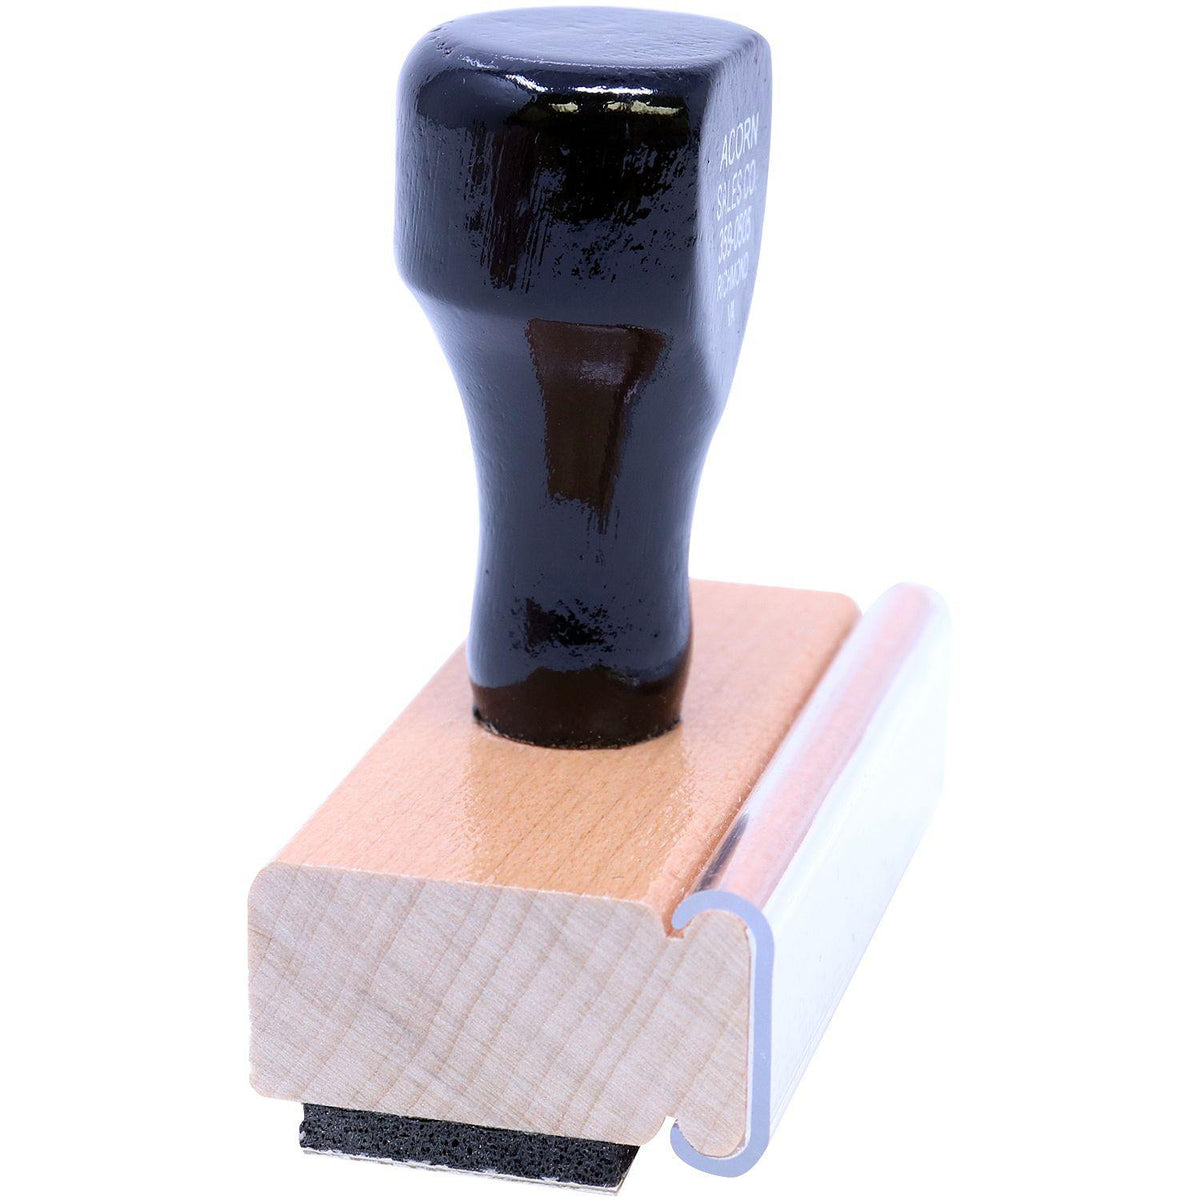 Large Social Distancing Rubber Stamp - Engineer Seal Stamps - Brand_Acorn, Impression Size_Large, Stamp Type_Regular Stamp, Type of Use_General, Type of Use_Medical Office